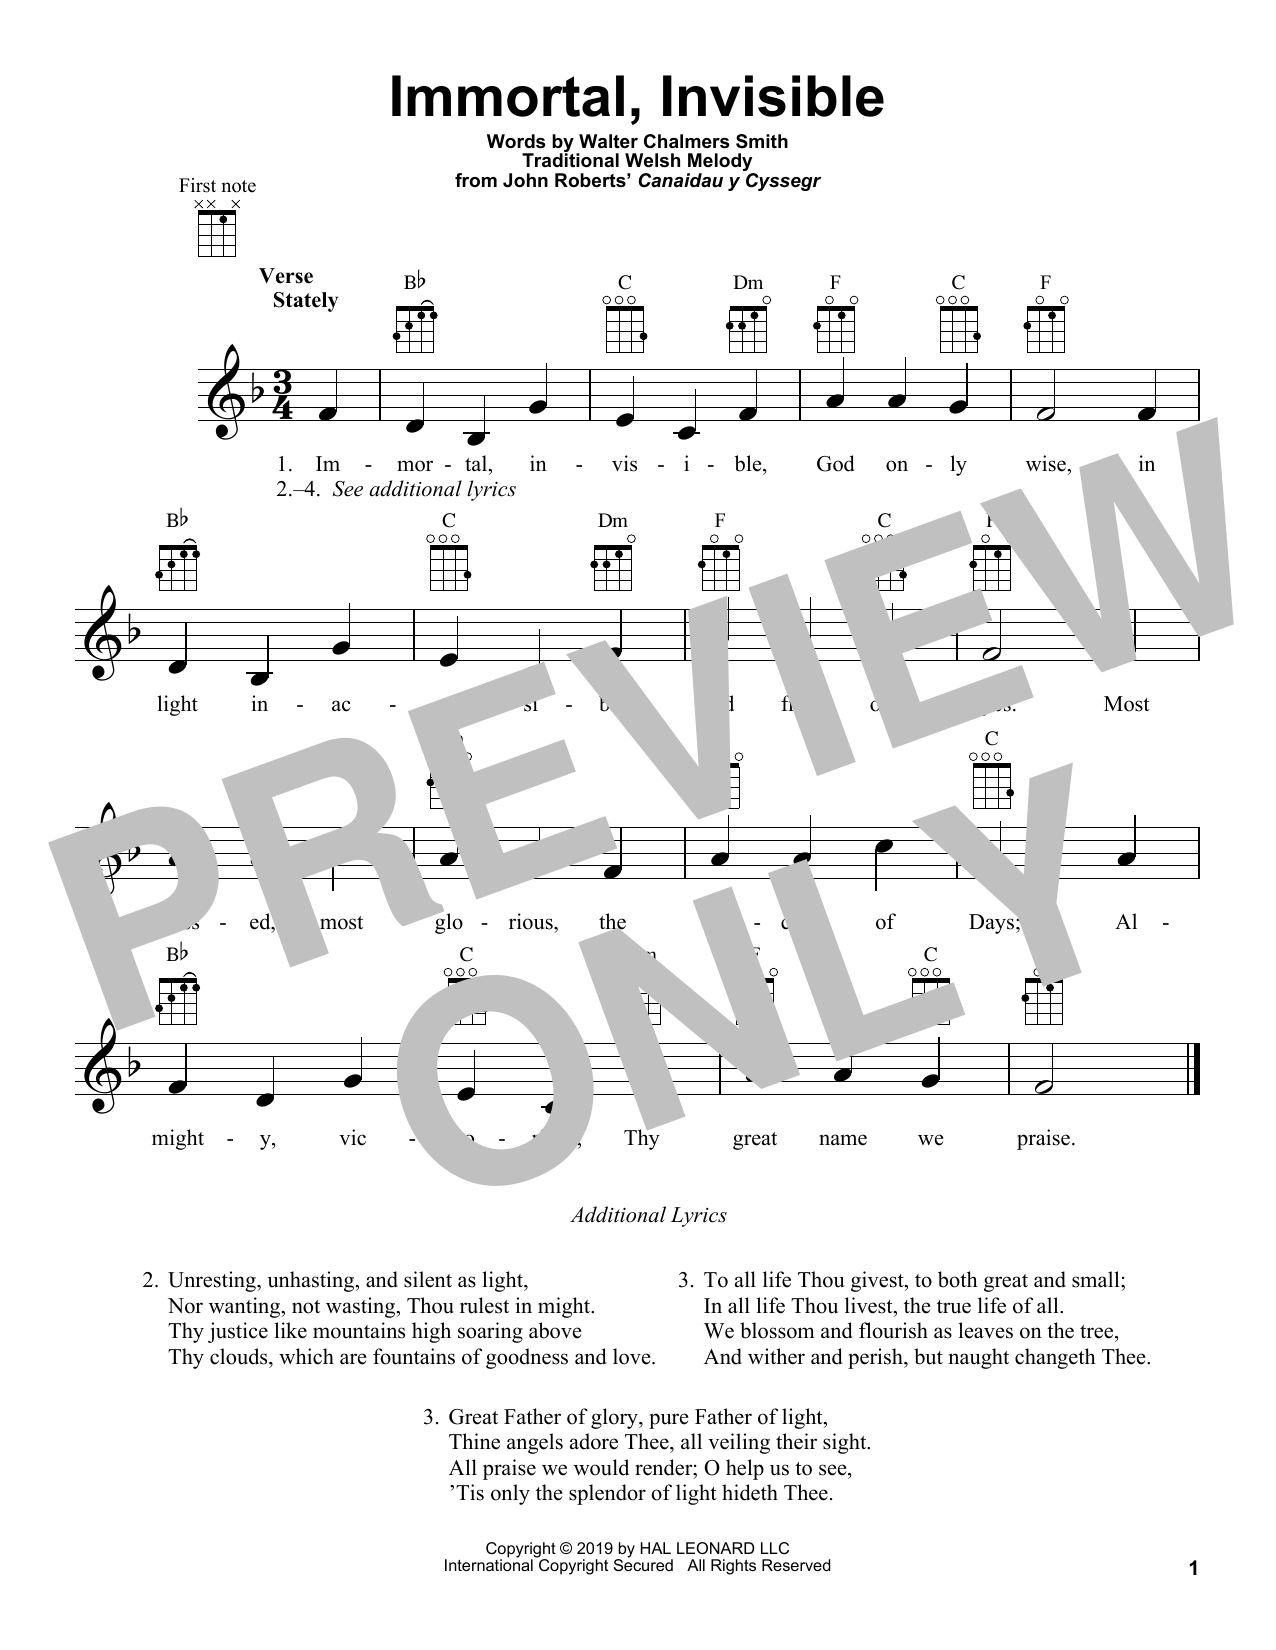 Download Traditional Welsh Melody Immortal, Invisible Sheet Music